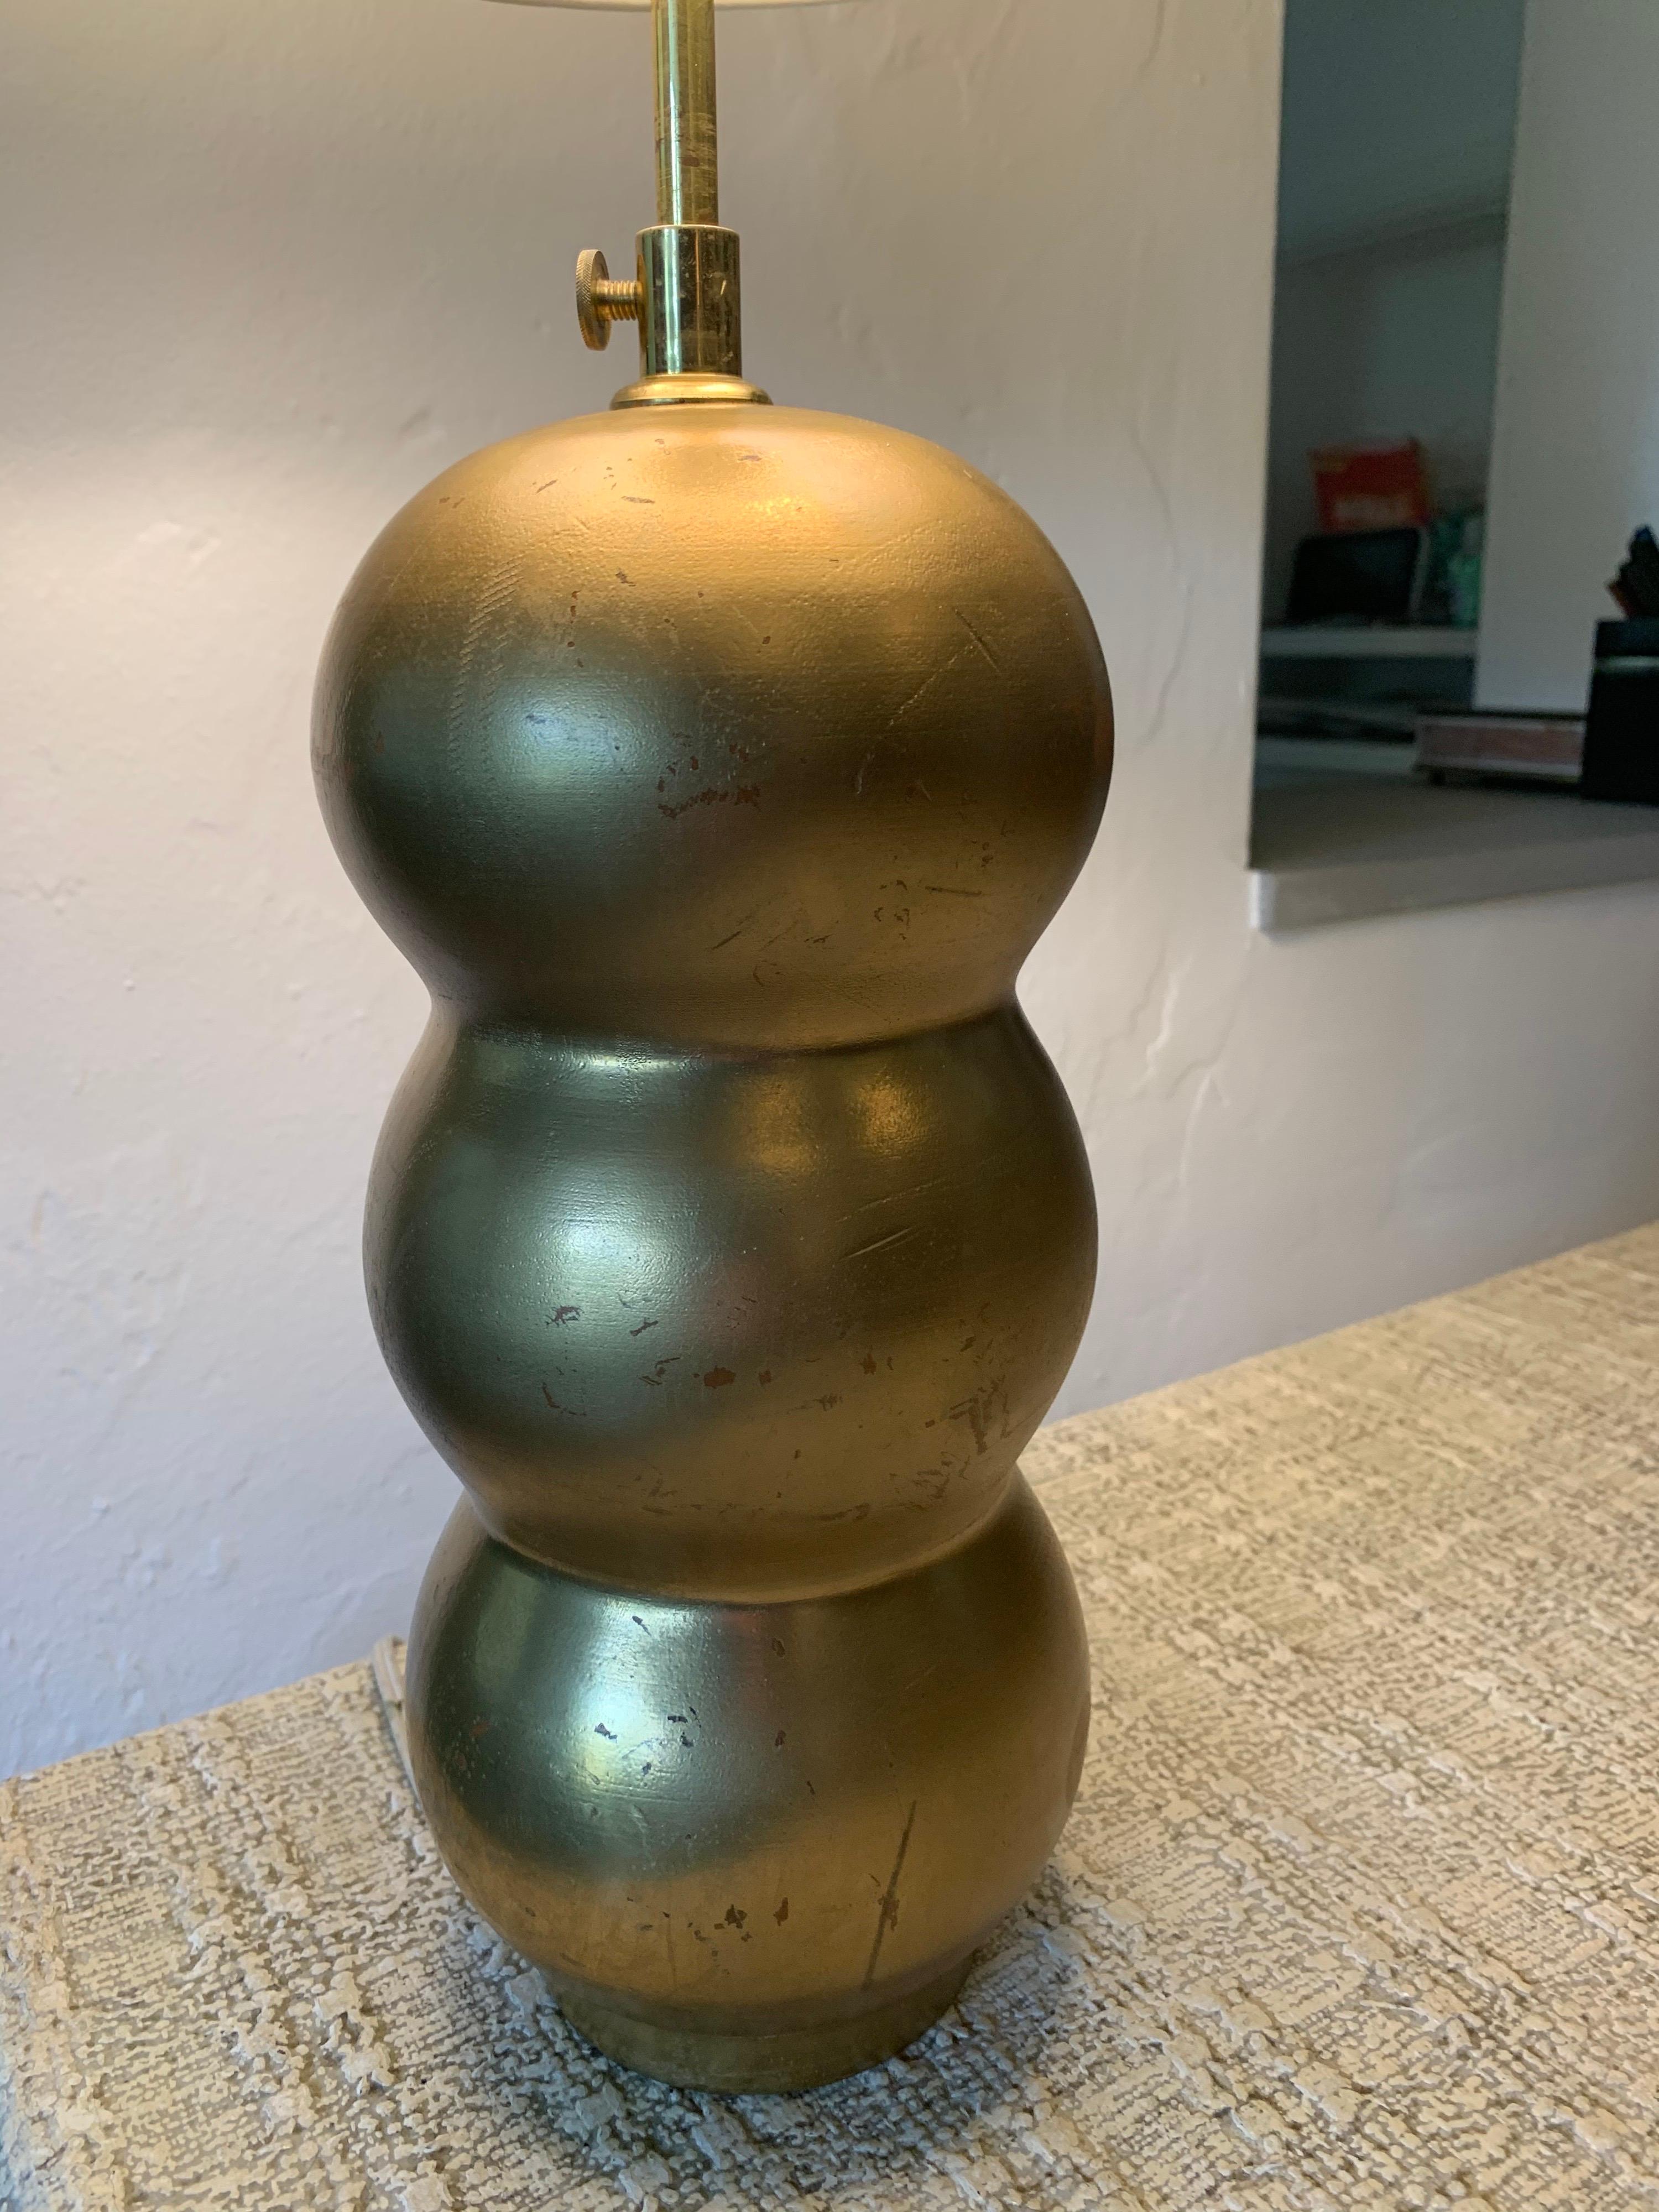 Gold gilded one solid turned wood lamp base. All original sockets and hardware, custom shade.

Note: The shade is normally not included in our lamp offerings. However, if you like this shade, it will be included at no additional cost. This shade